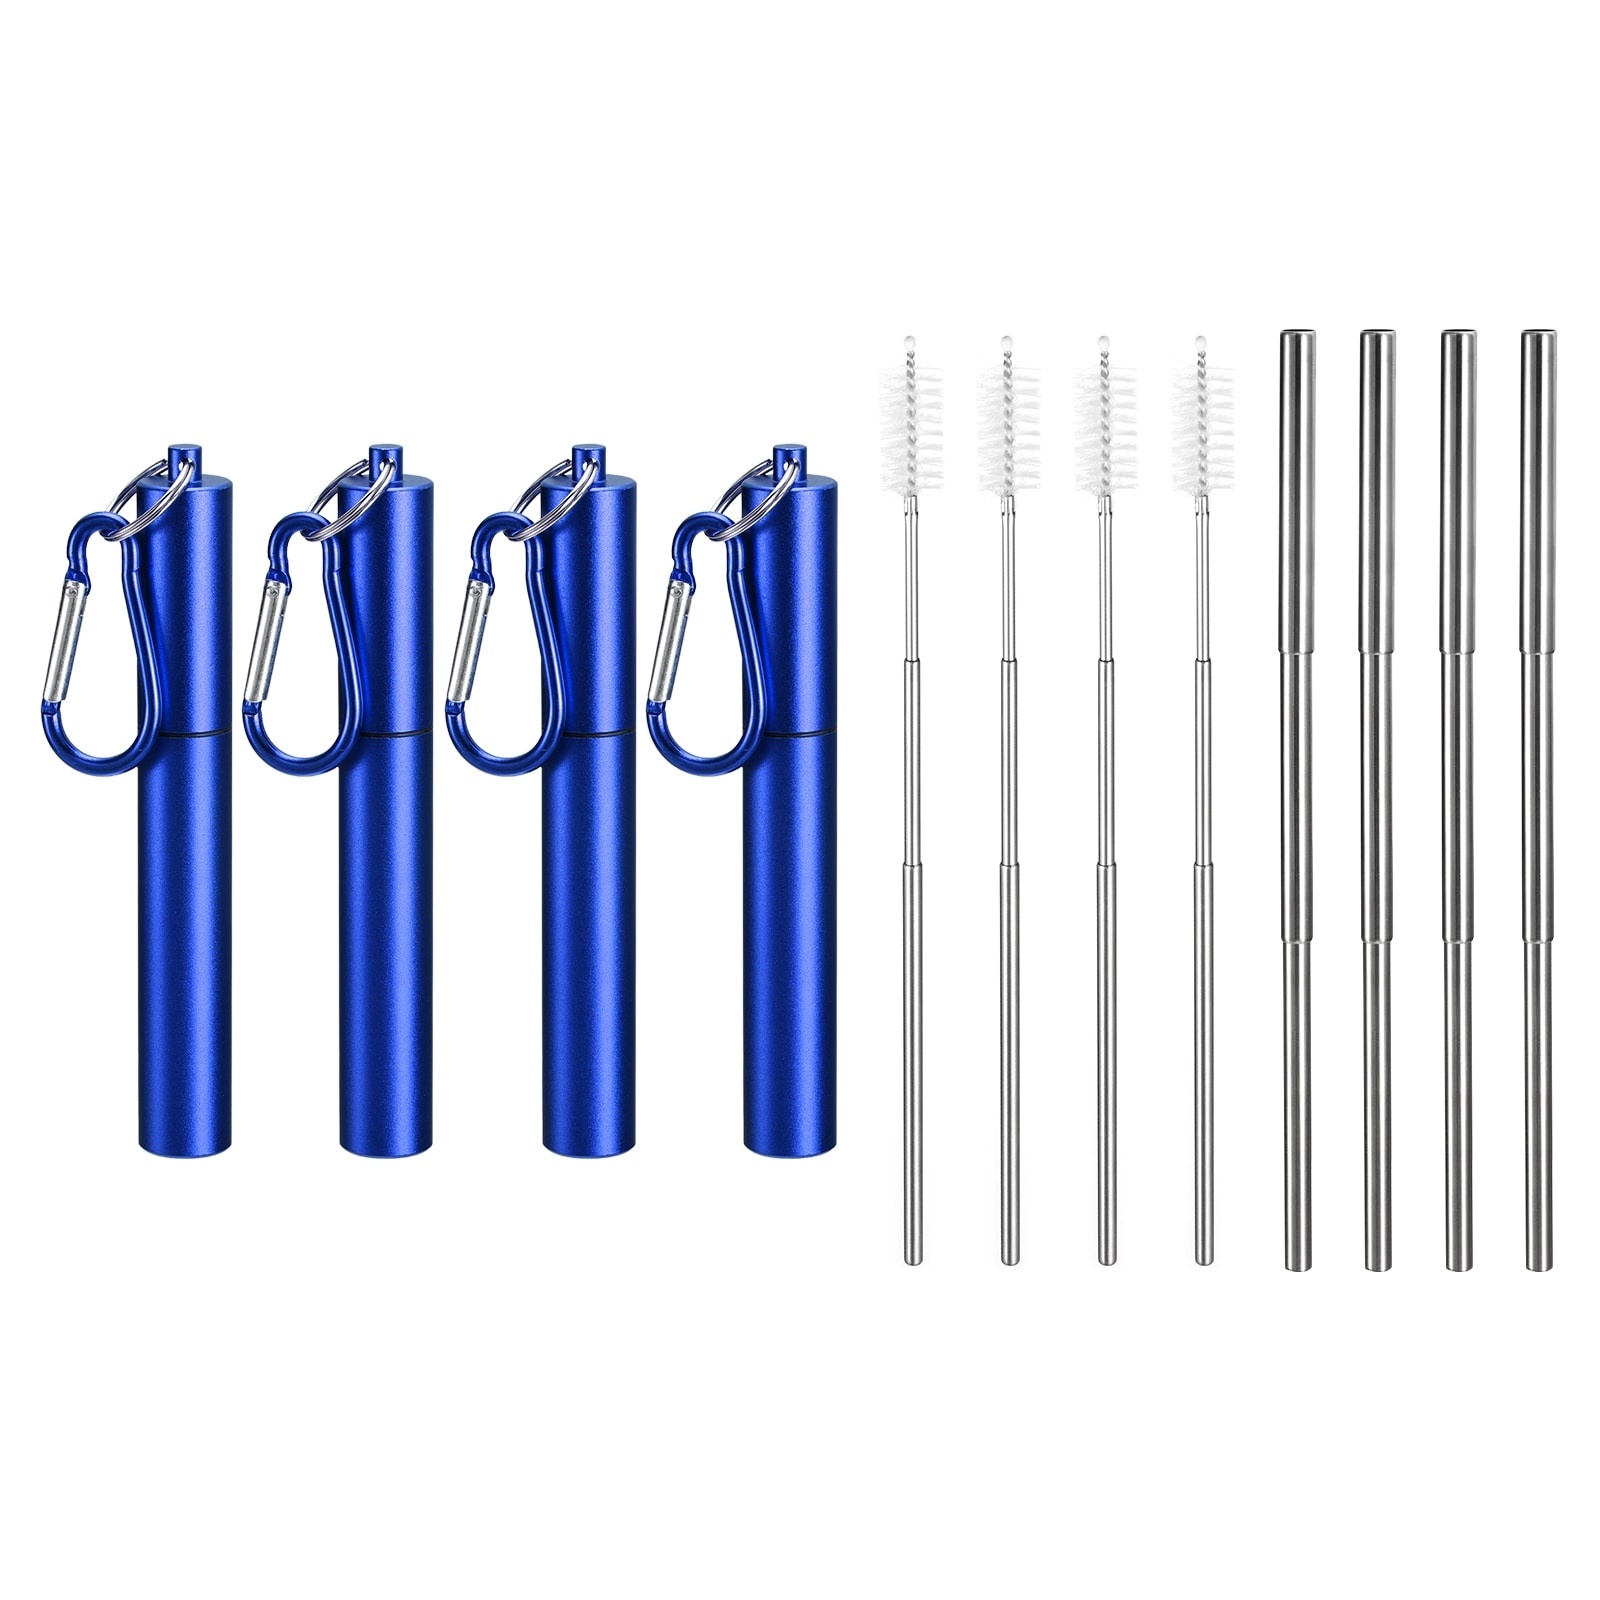 https://ak1.ostkcdn.com/images/products/is/images/direct/98053076f9b4732ebf25b87e6281b51b8e2c70c7/4Pcs-Reusable-Metal-Straws-Telescopic-Stainless-Steel-Straw-Flat-Case.jpg